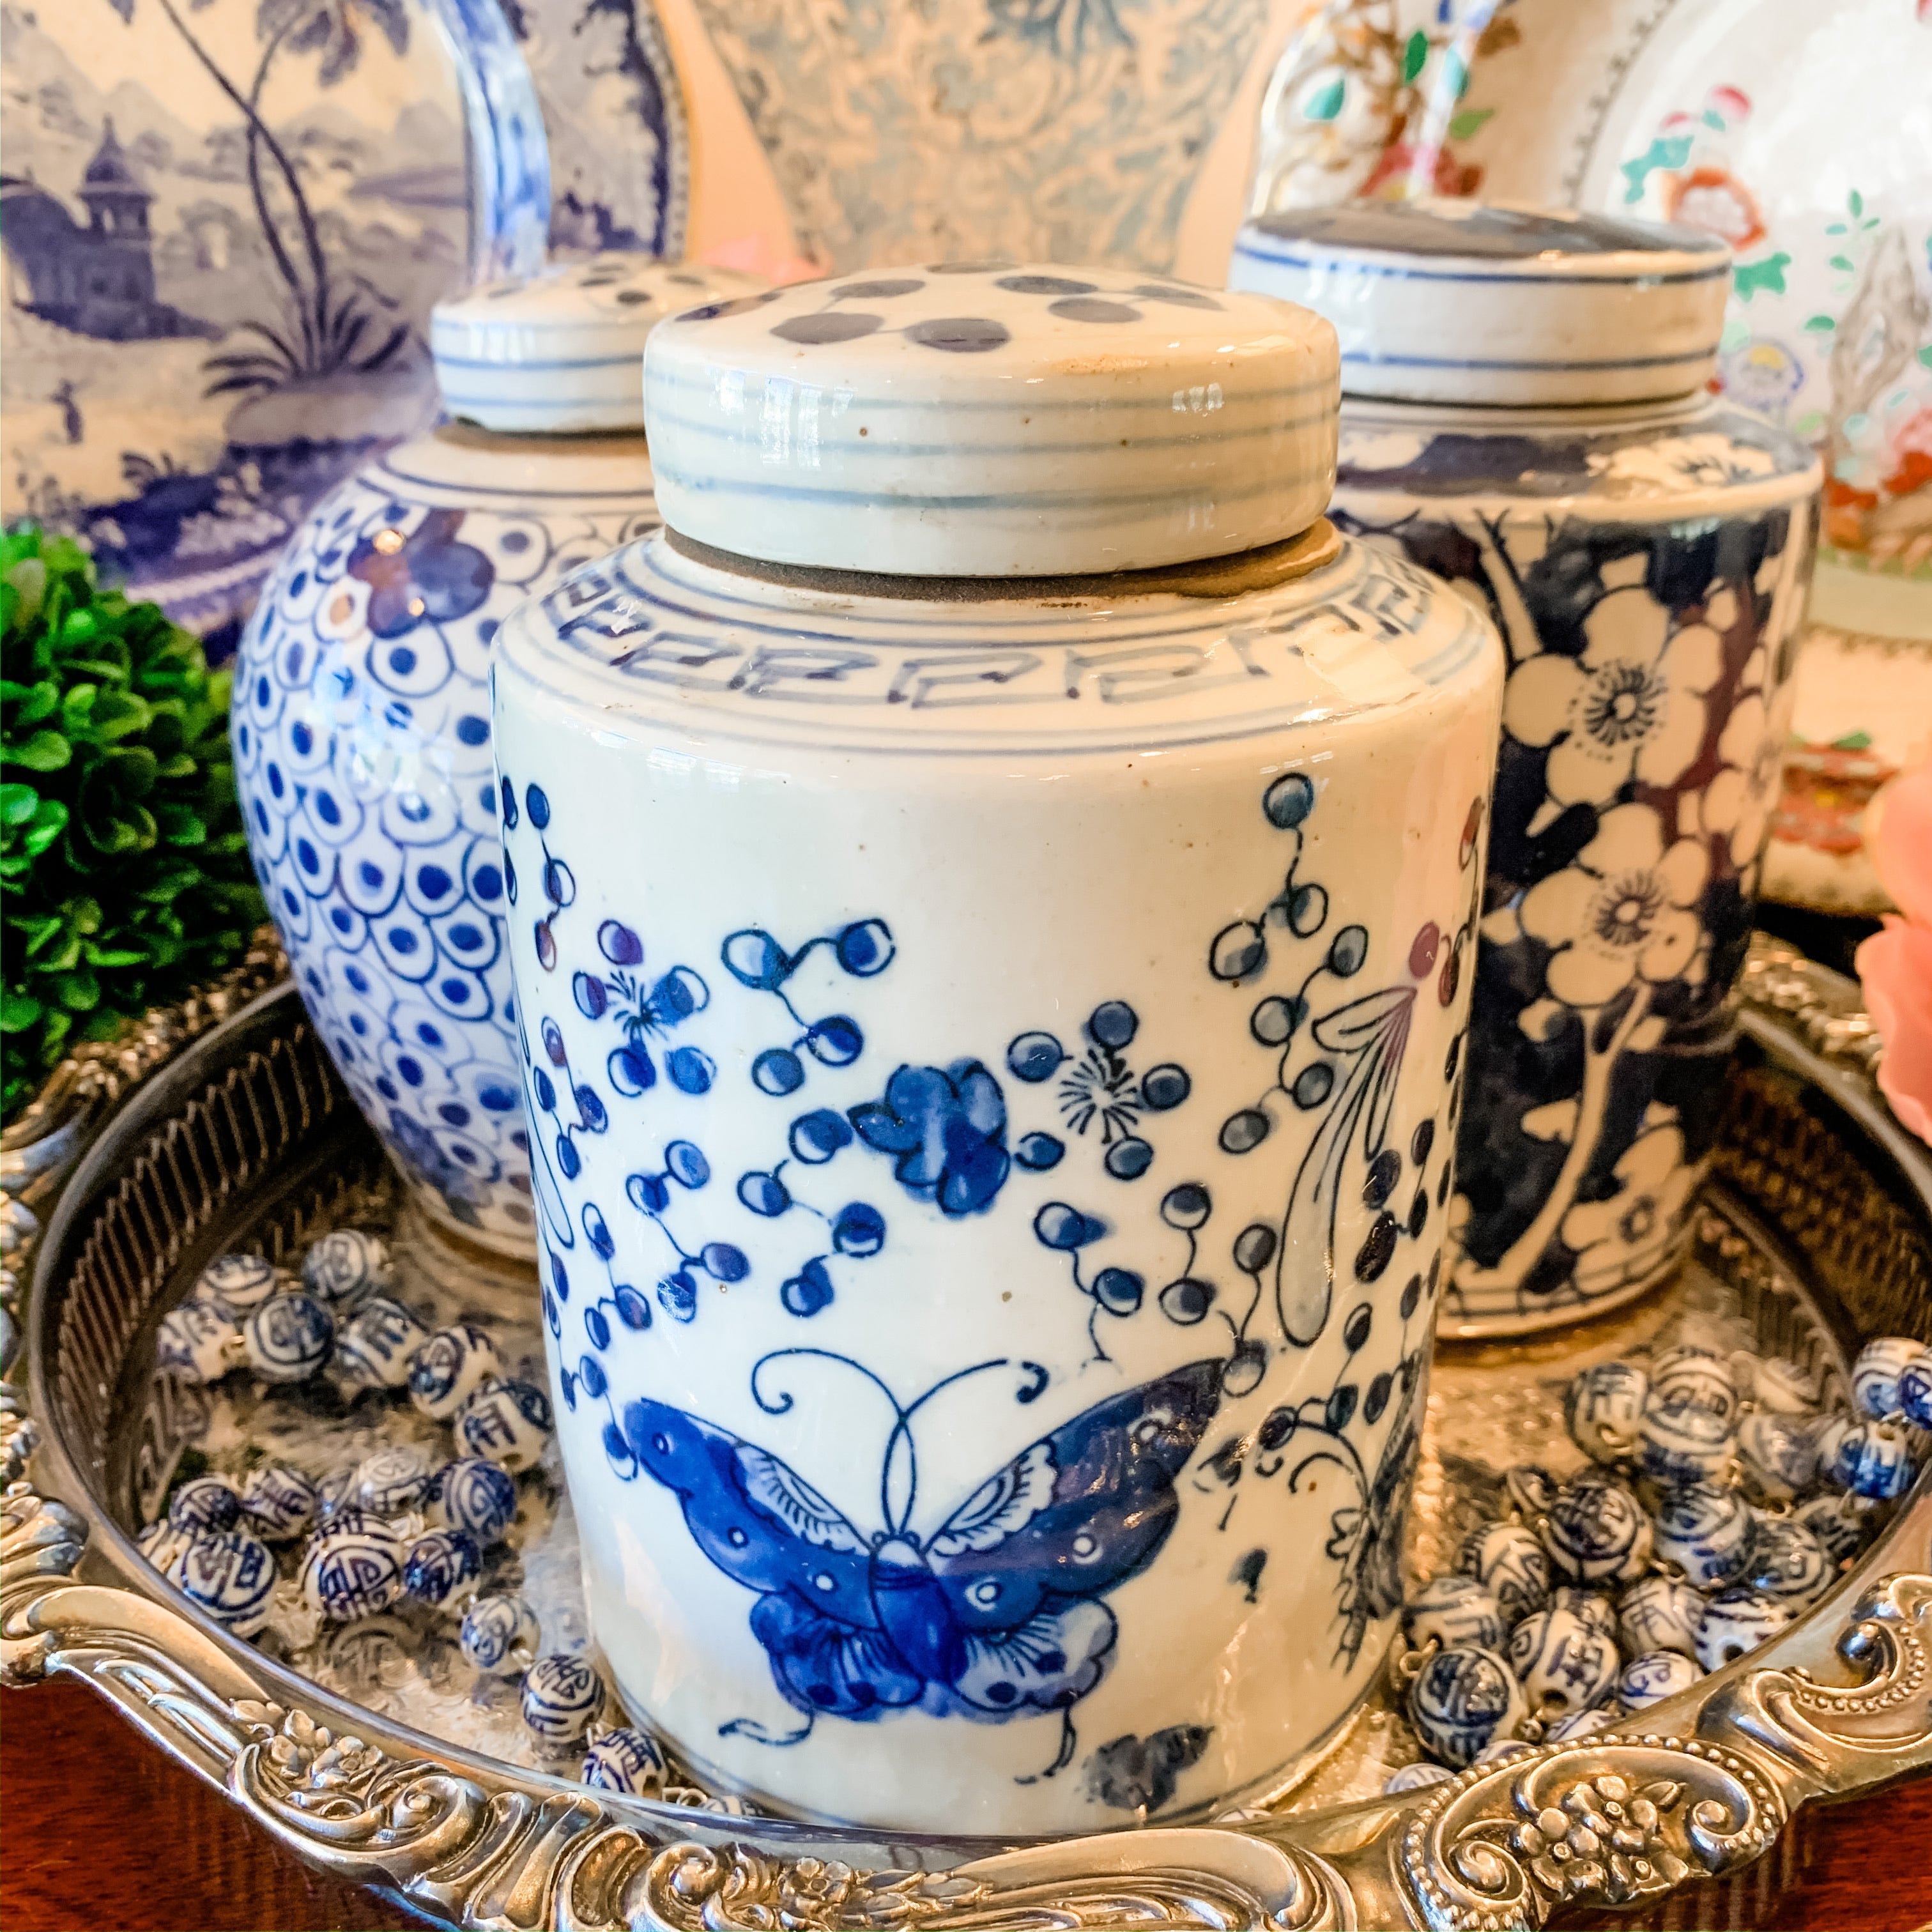 Shop Collectible Brooks for a wide selection of classic blue and white porcelain jars, perfect for adding a touch of chinoiserie to your home decor!  This beautiful hand painted jar is made in the antique style and features a butterfly design.  It stands 7.5" tall.  